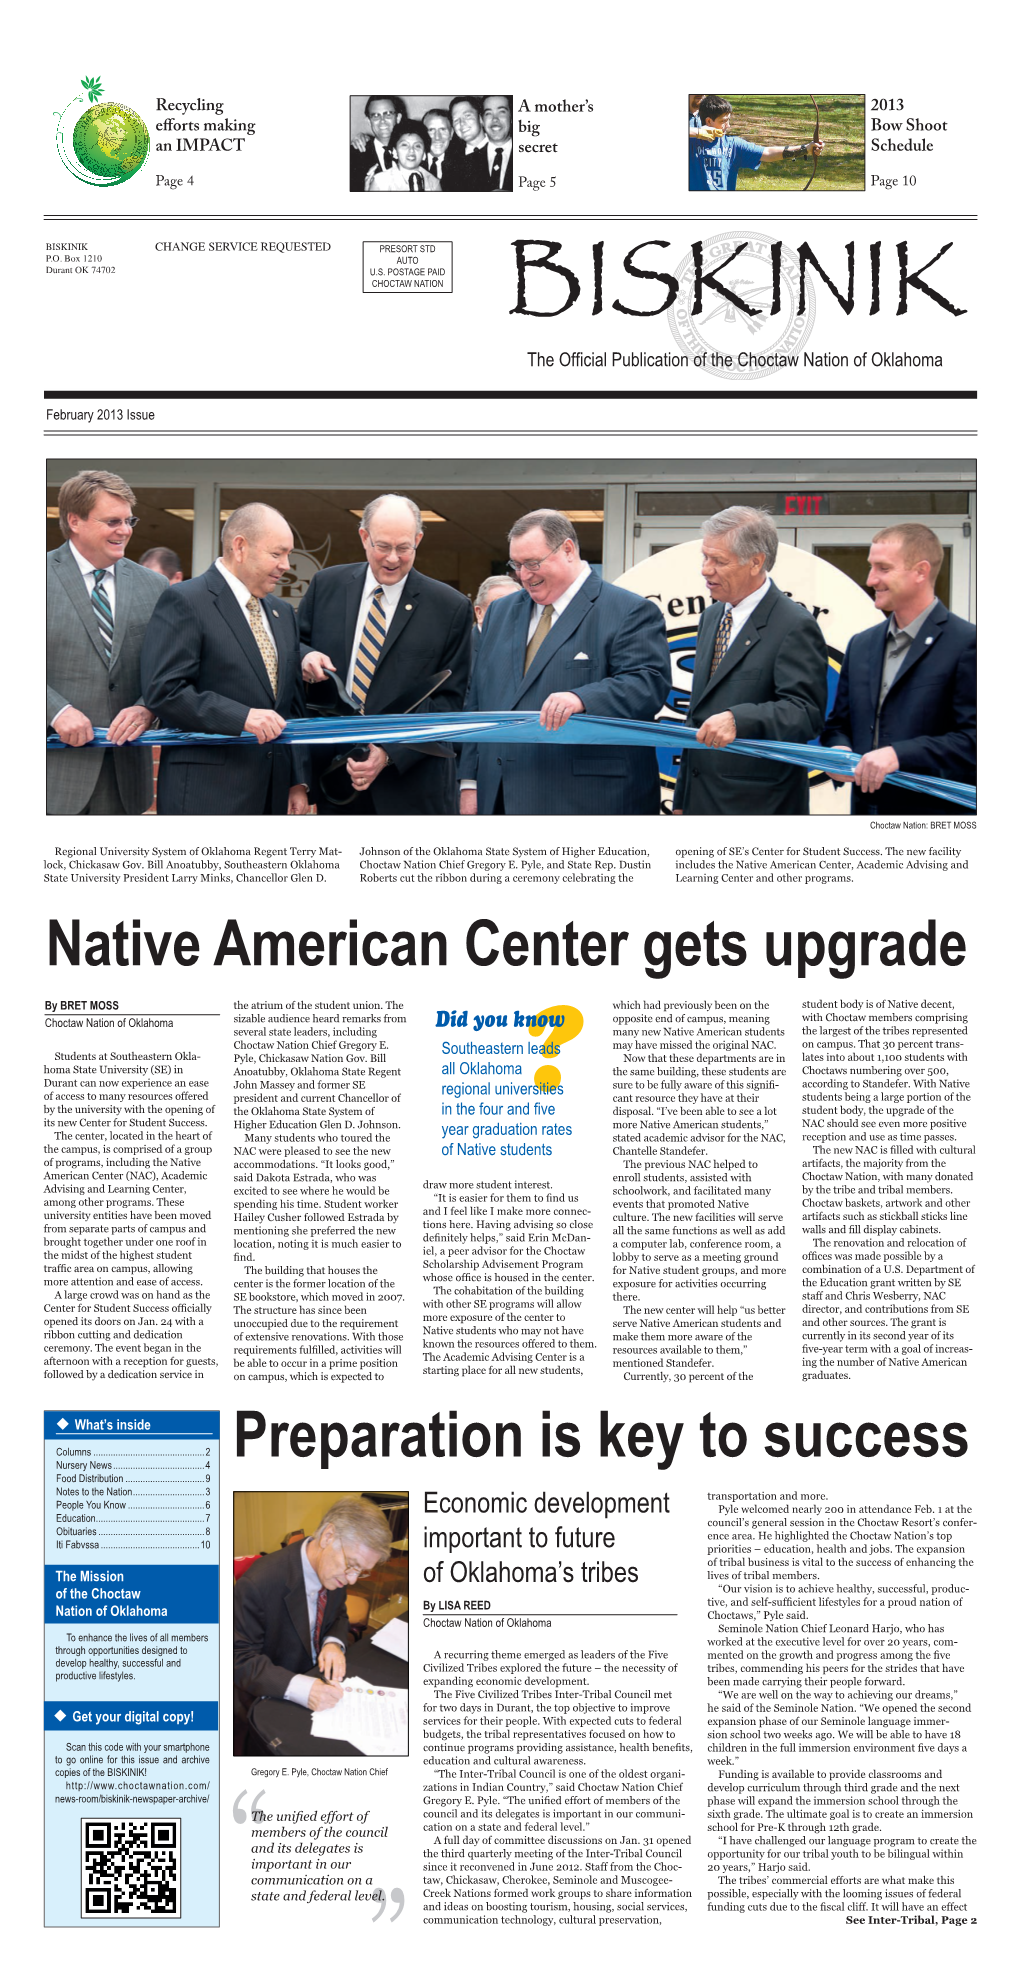 Native American Center Gets Upgrade Preparation Is Key to Success